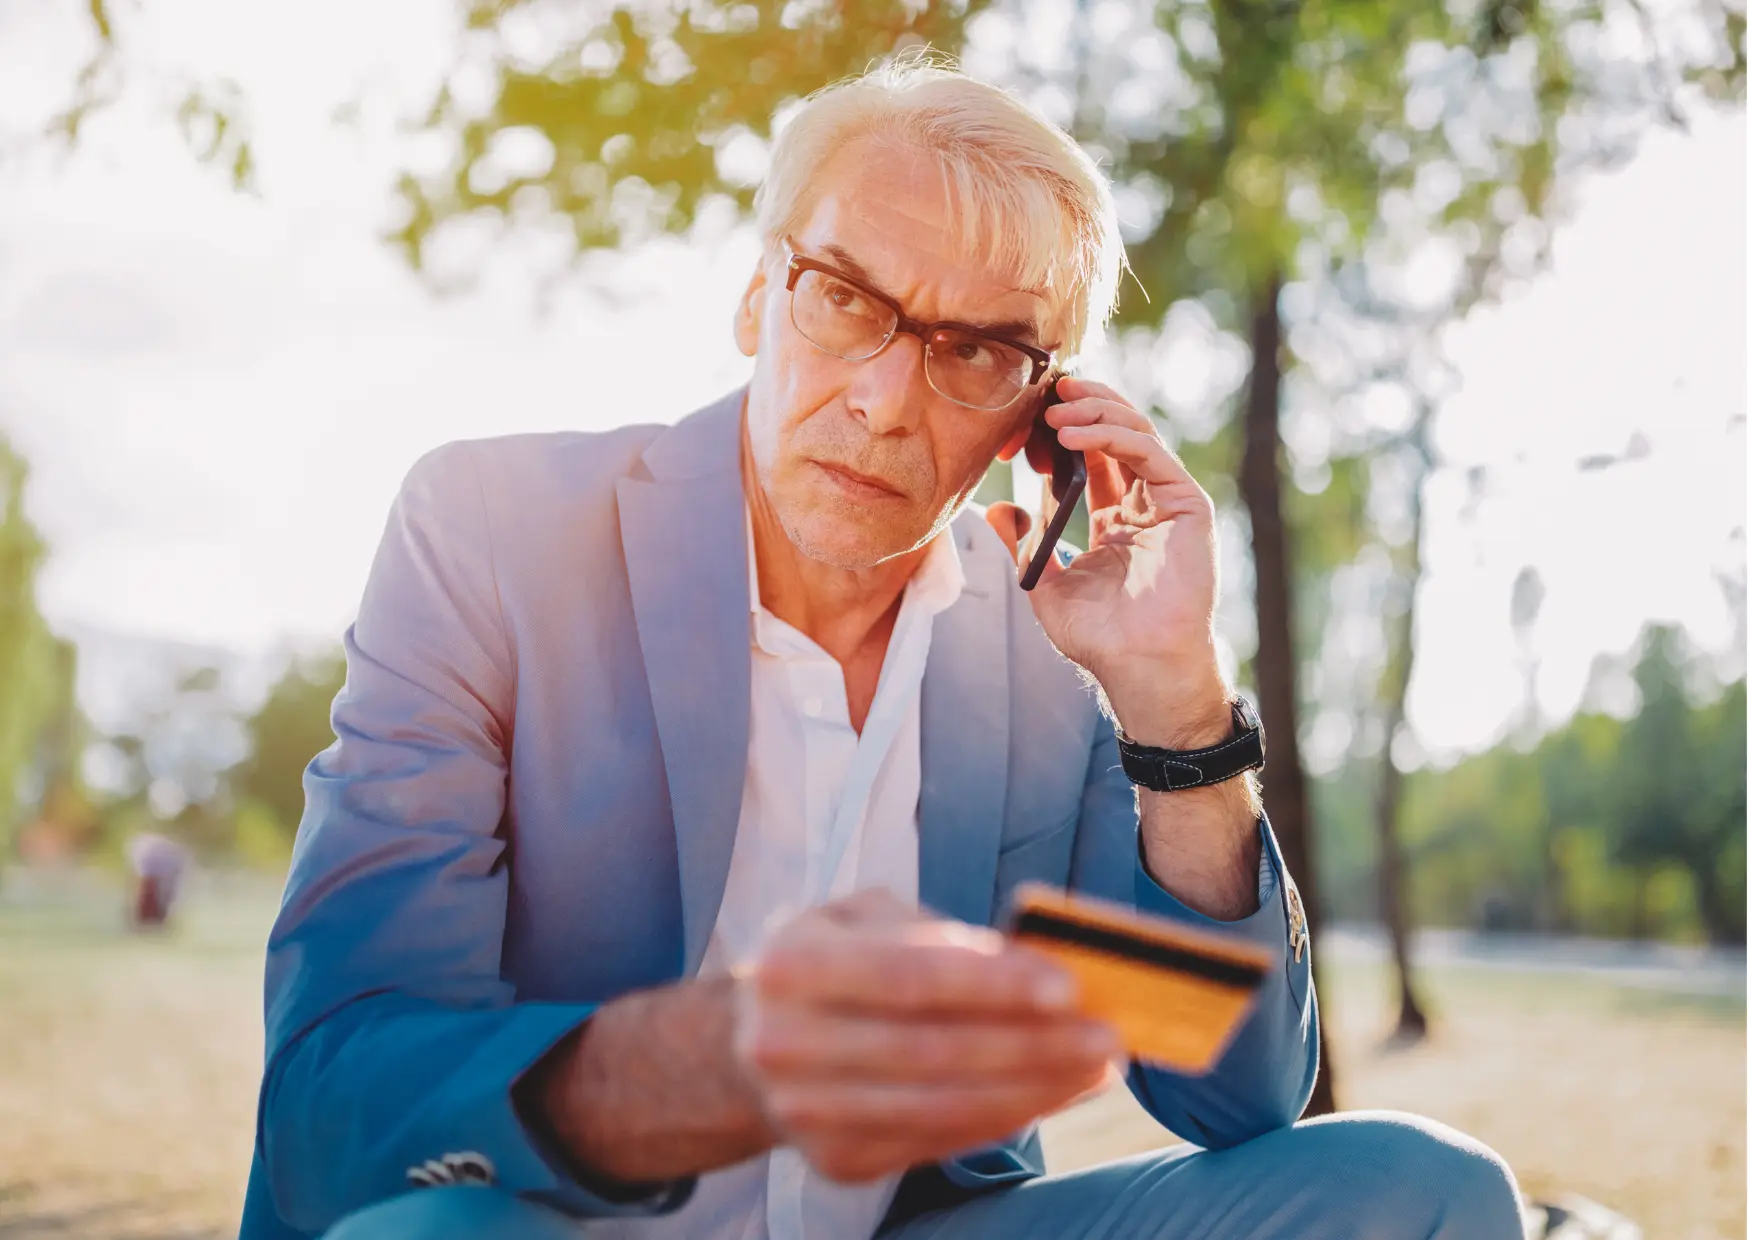 Pension scam - how to avoid nuisance calls?